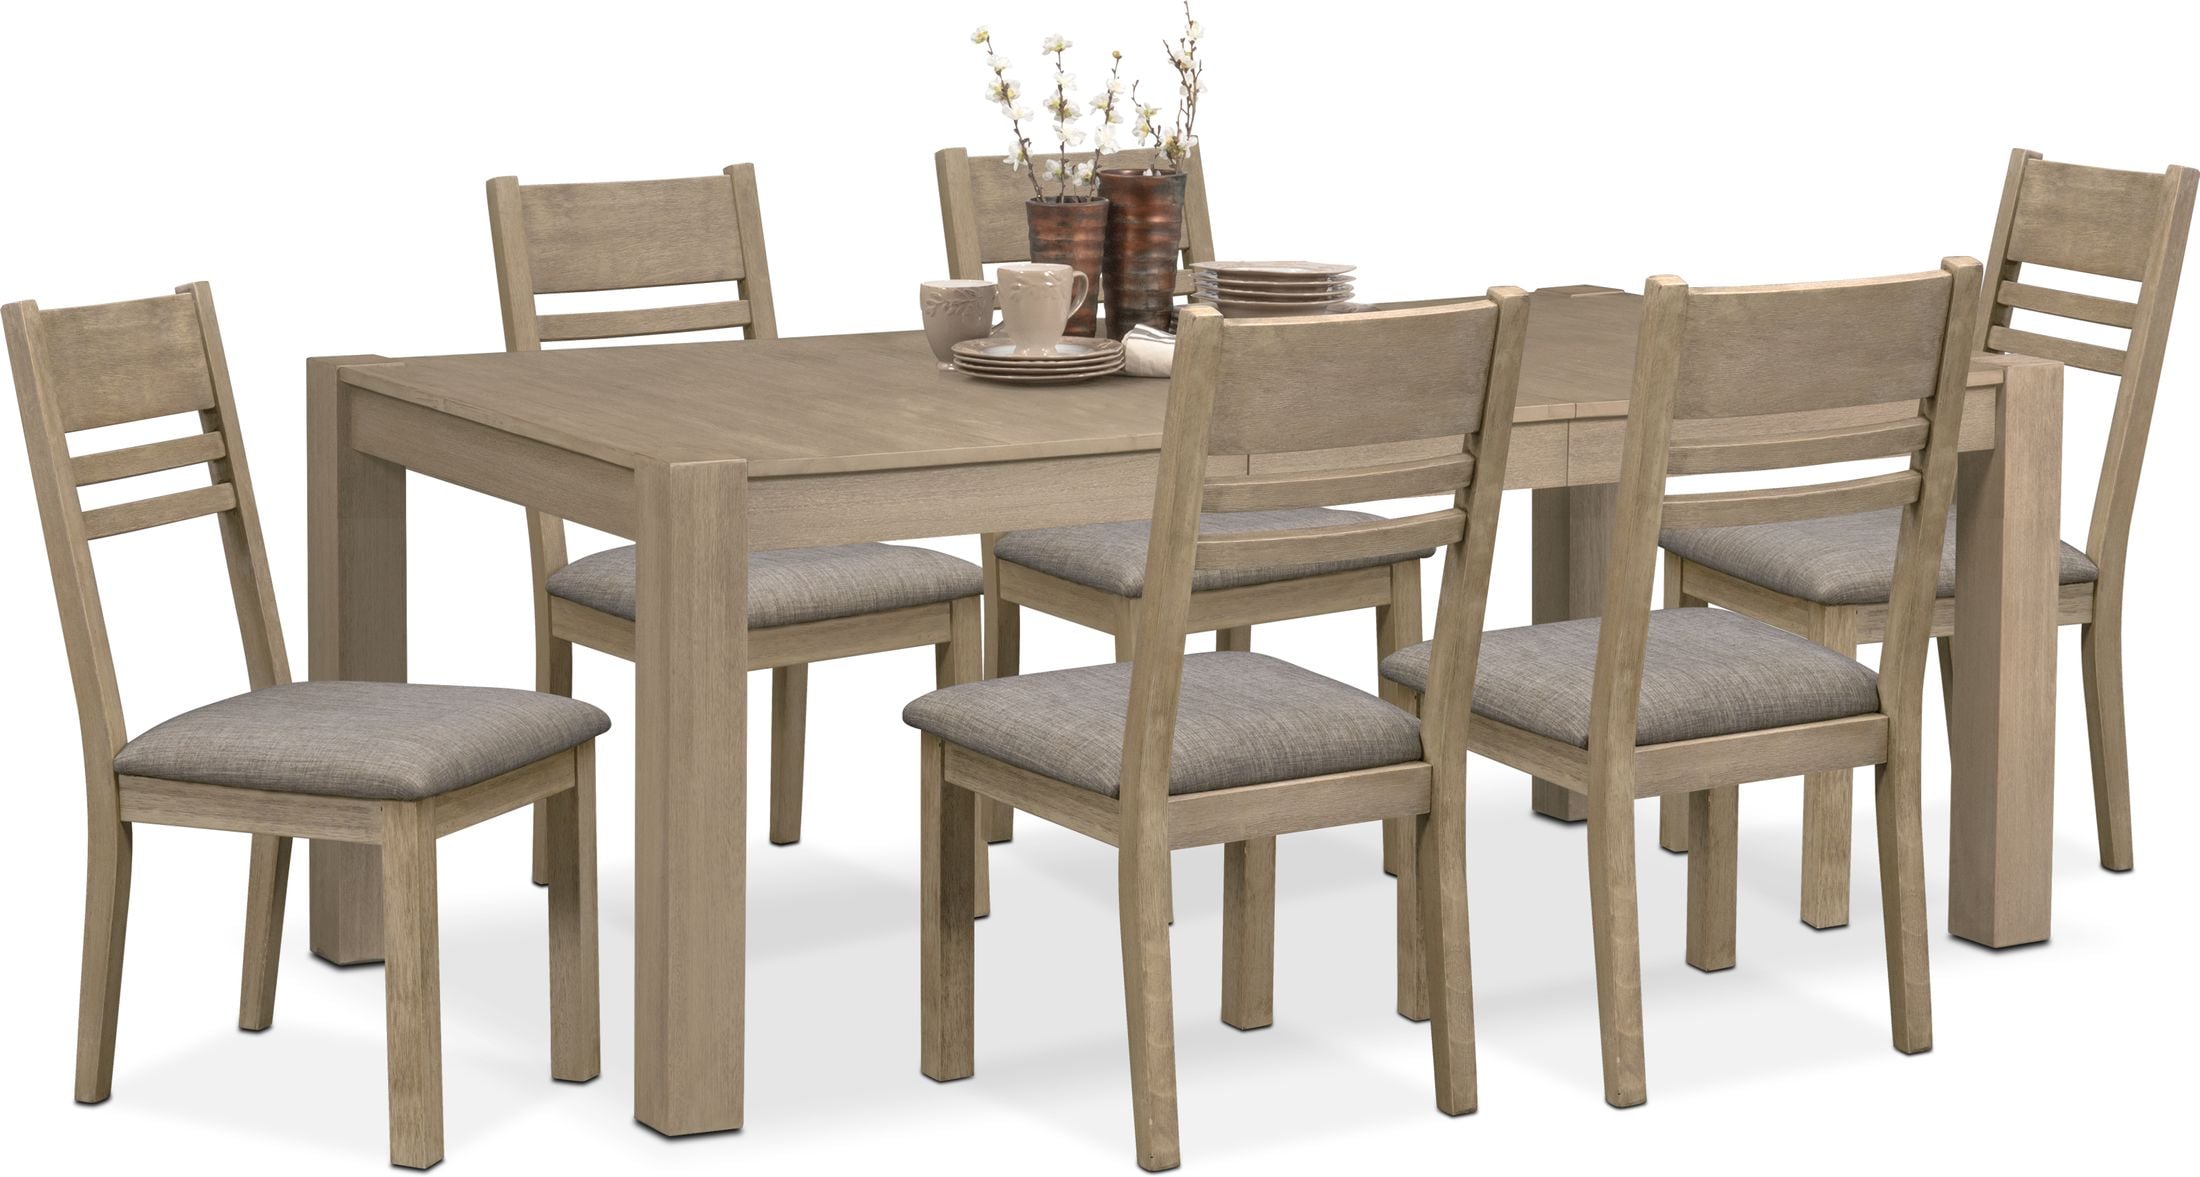 Undefined Value City Furniture, Value City Gray Dining Room Sets